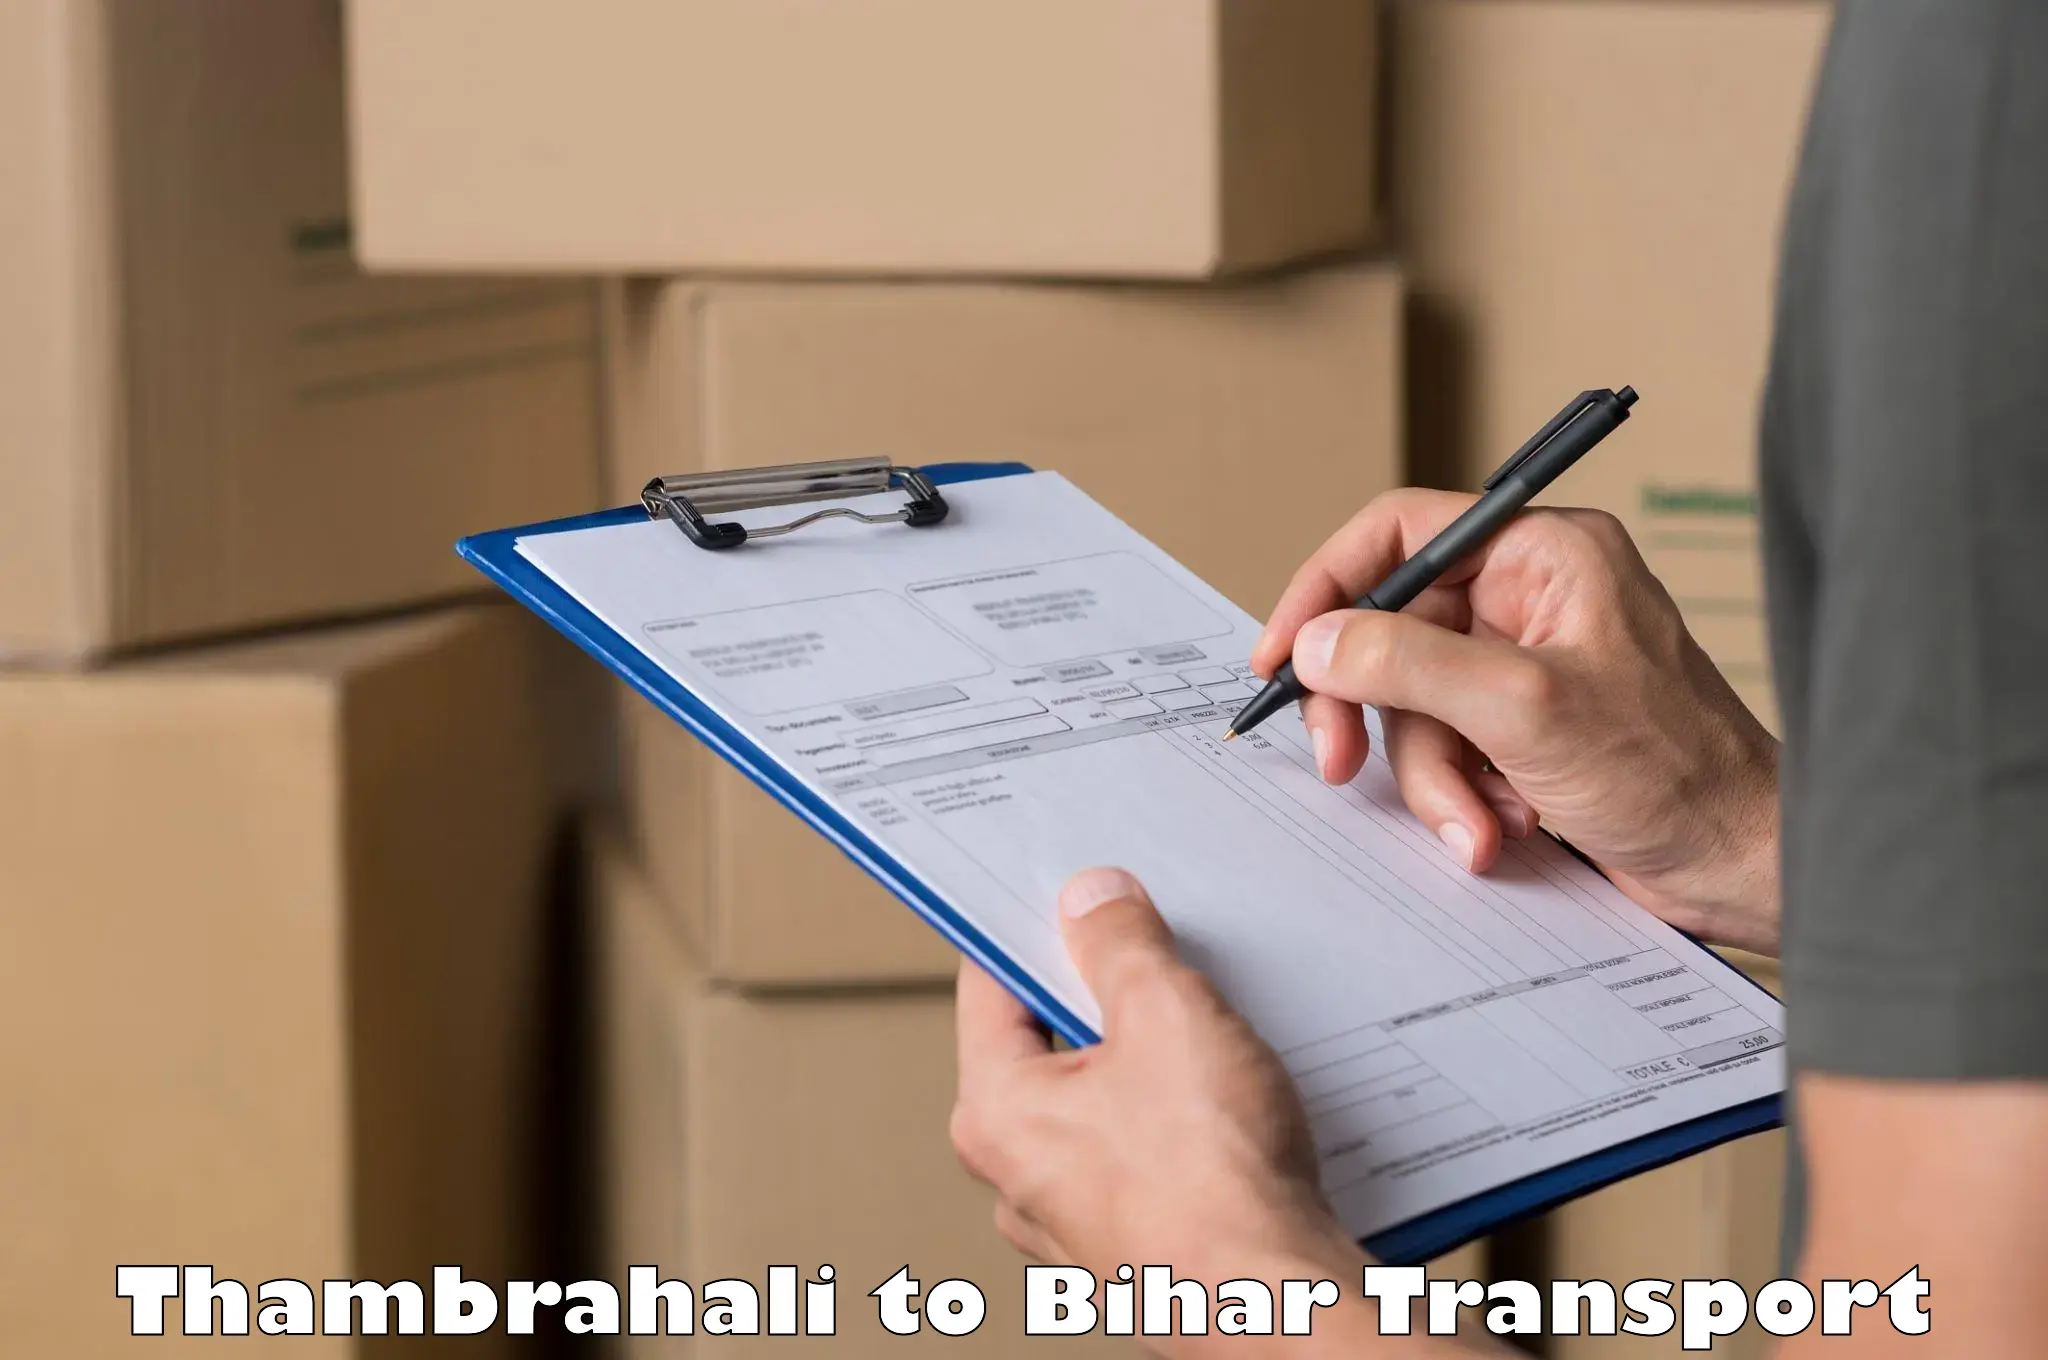 Furniture transport service Thambrahali to Chainpur